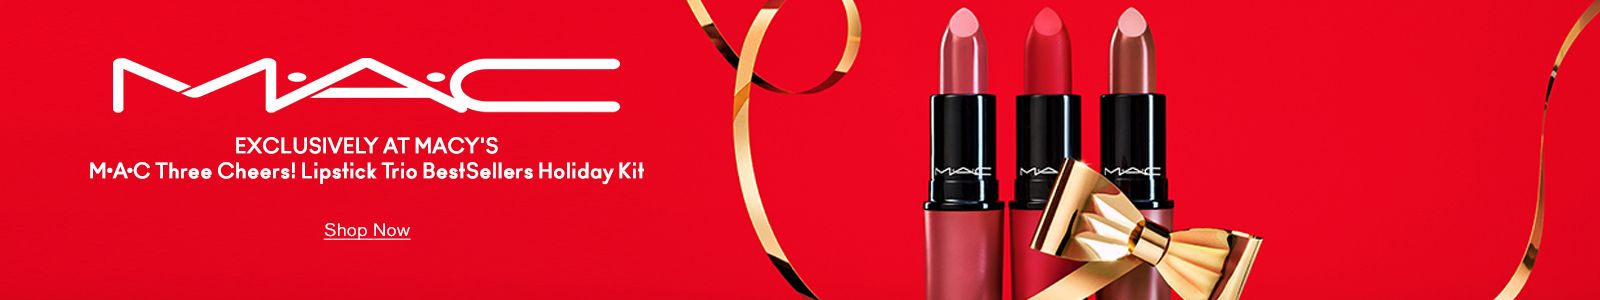 MAC, Exclusively at Macy's, MAC Three Cheers! Lipstick Trio BestSellers Holiday Kit, Shop Now